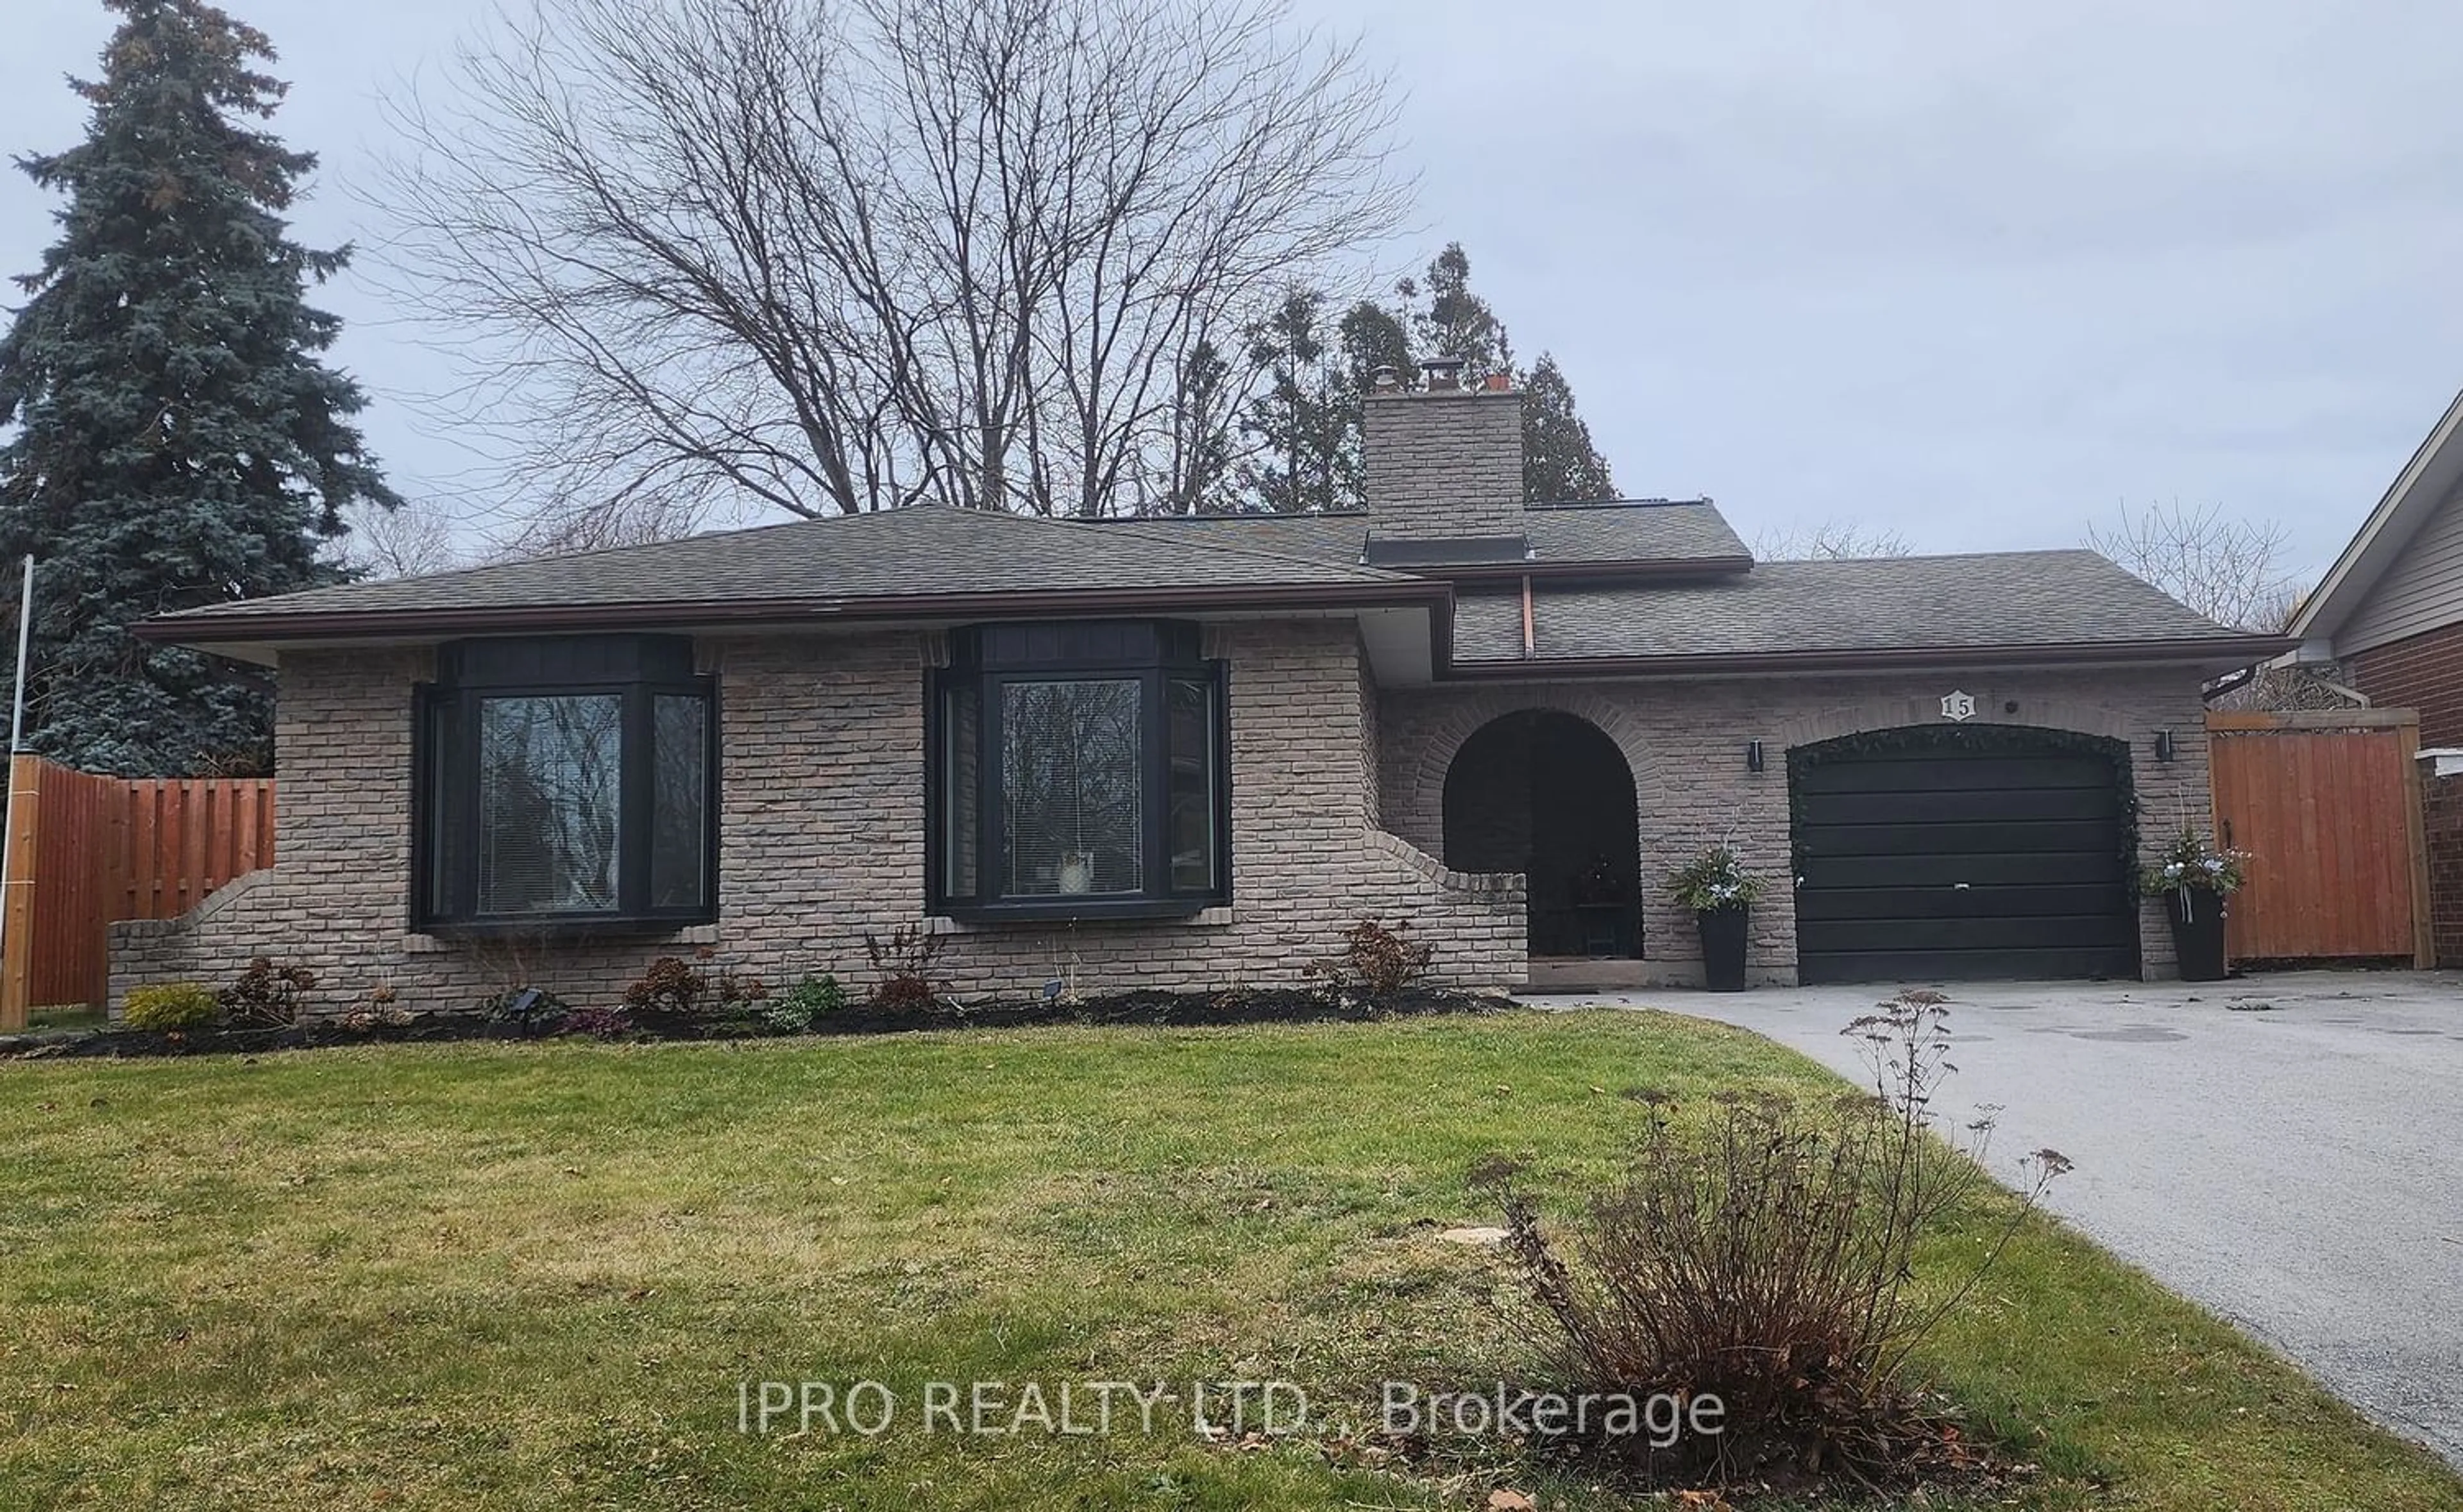 Home with brick exterior material for 15 Bayshore Cres, St. Catharines Ontario L2N 5Y3